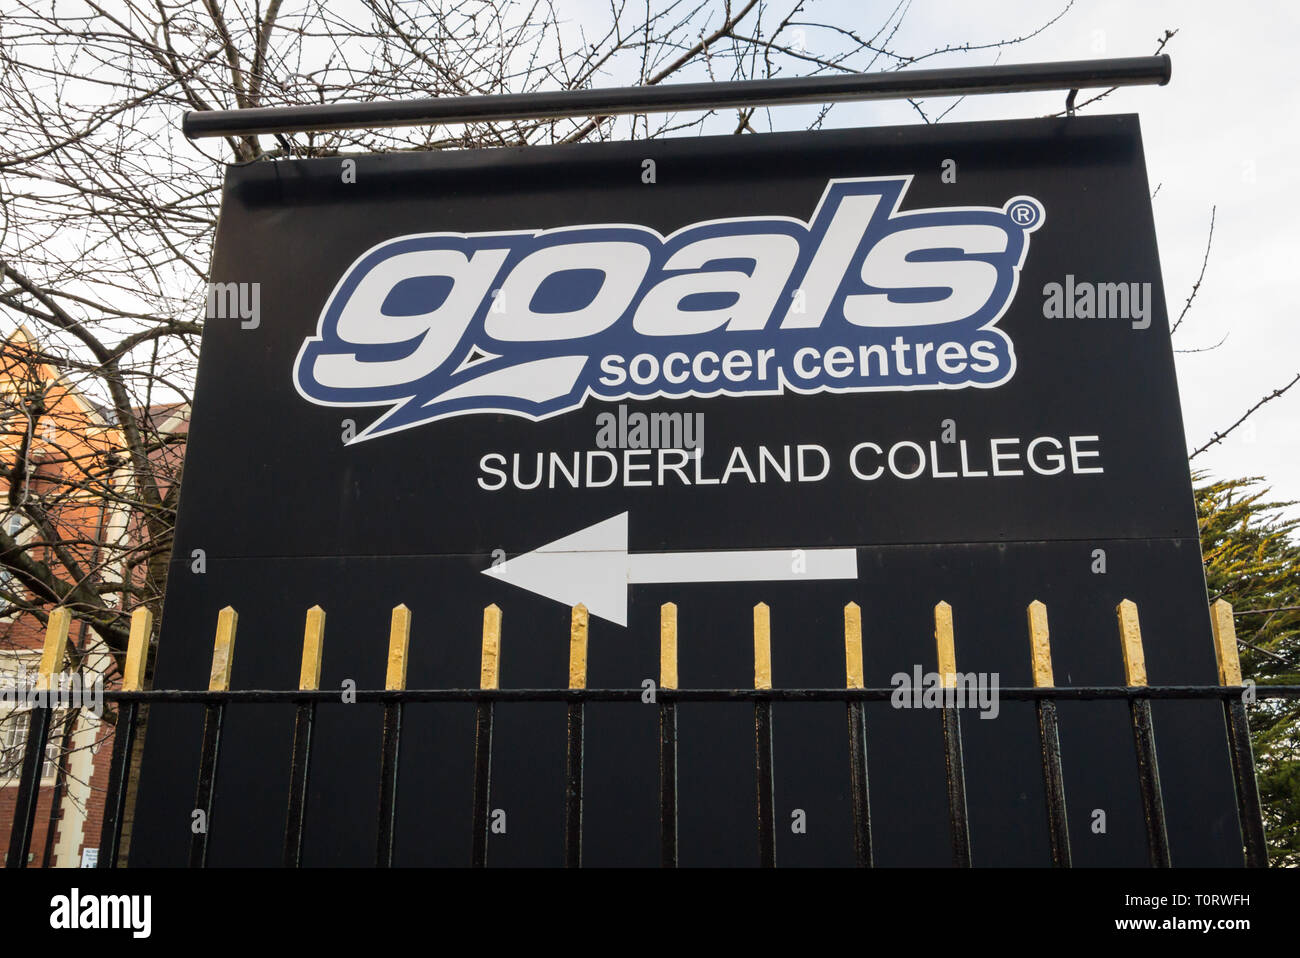 Goals Soccer Centres 5-a-side Centre at Sunderland College Stock Photo